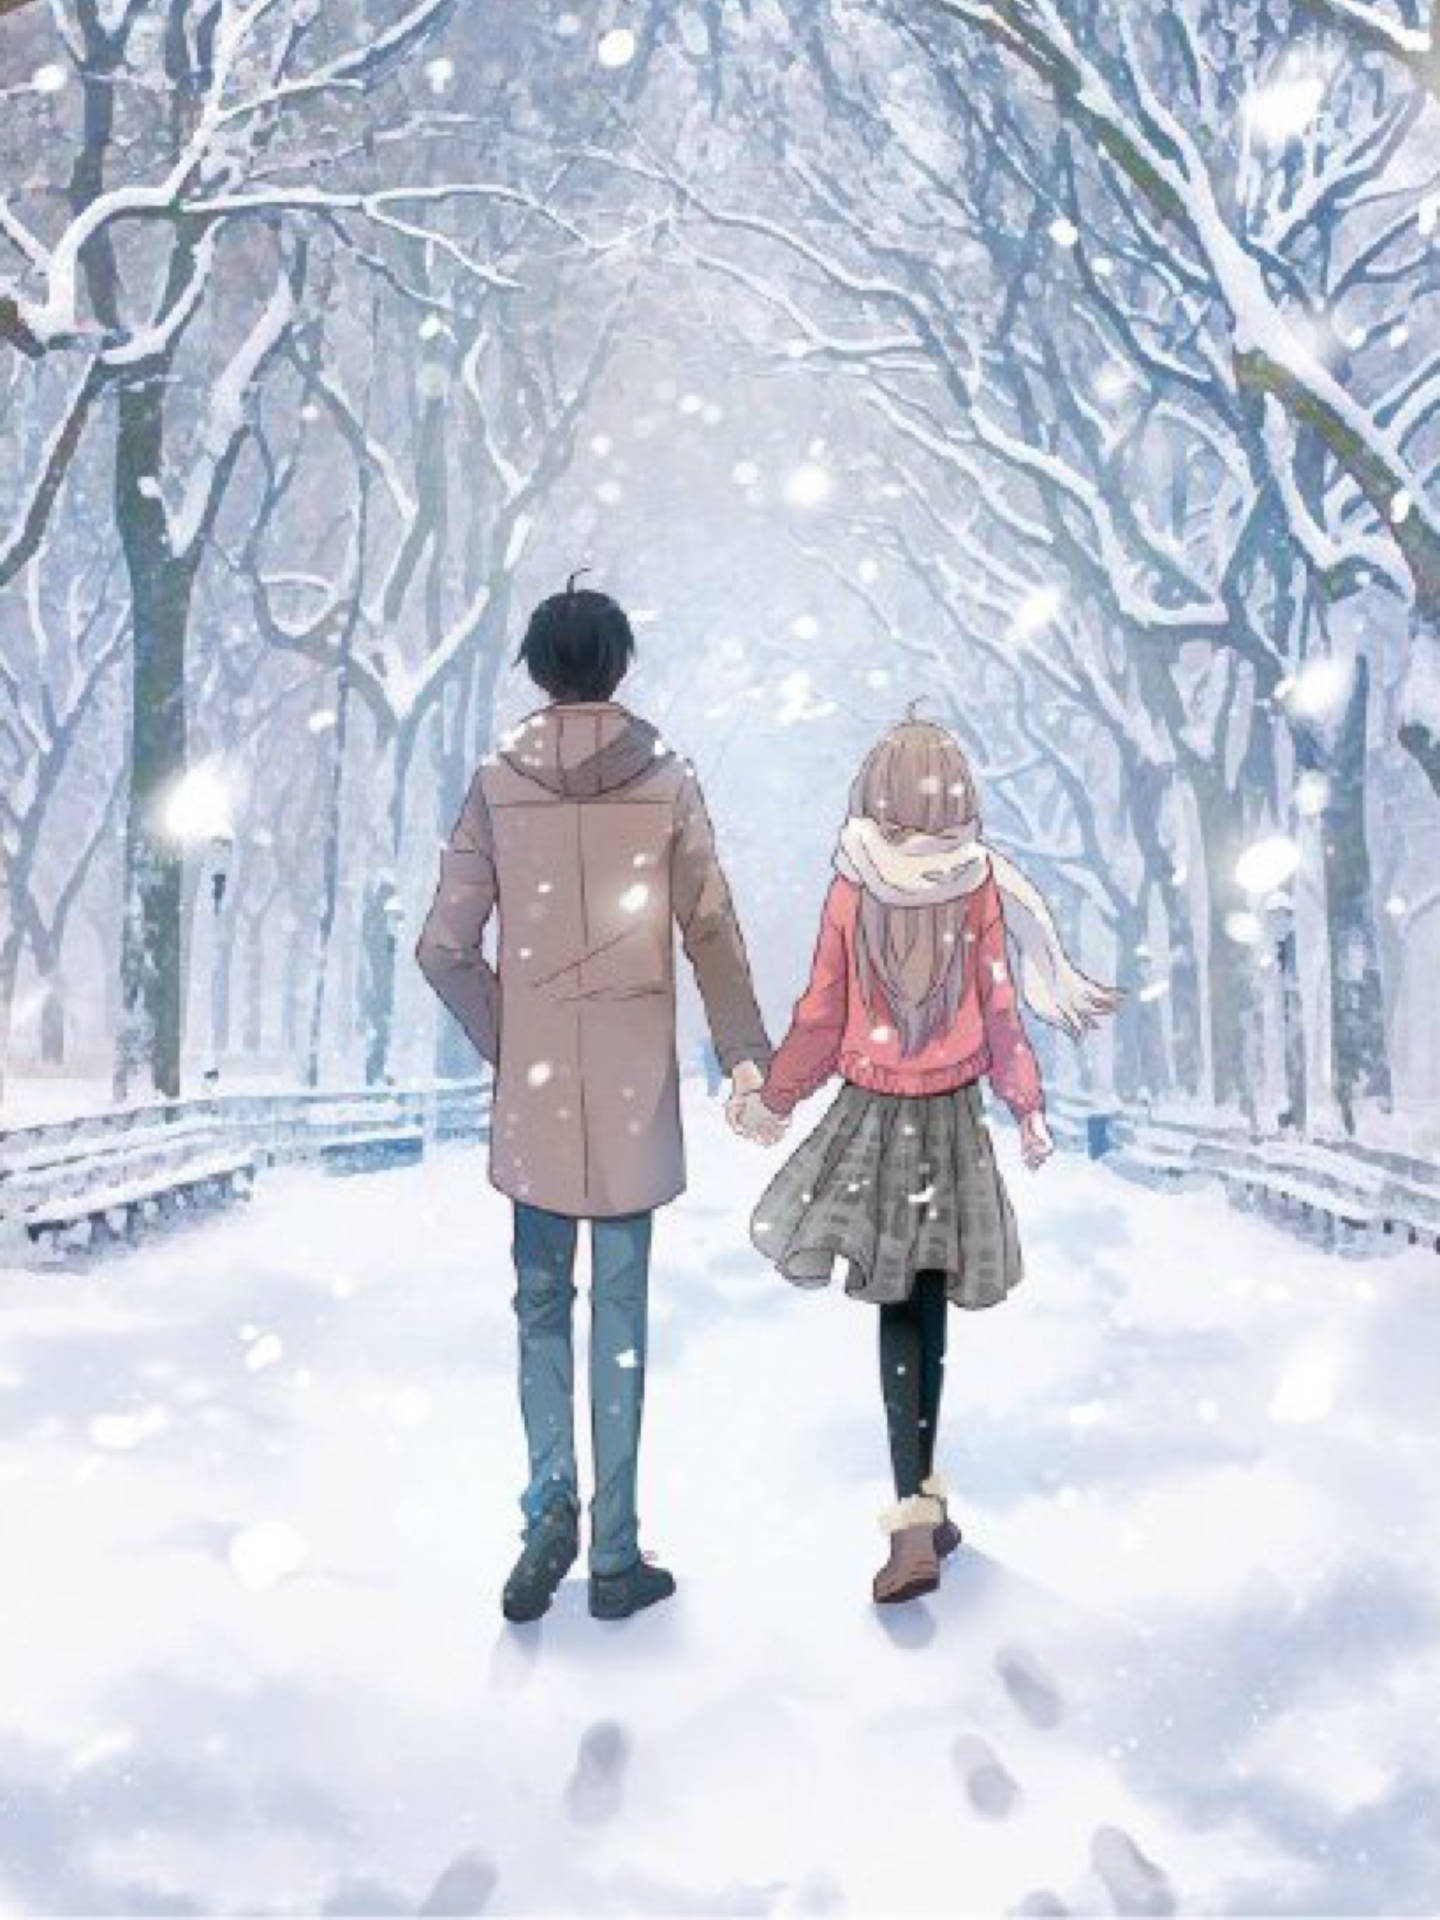 Japanese Anime Couple In Winter